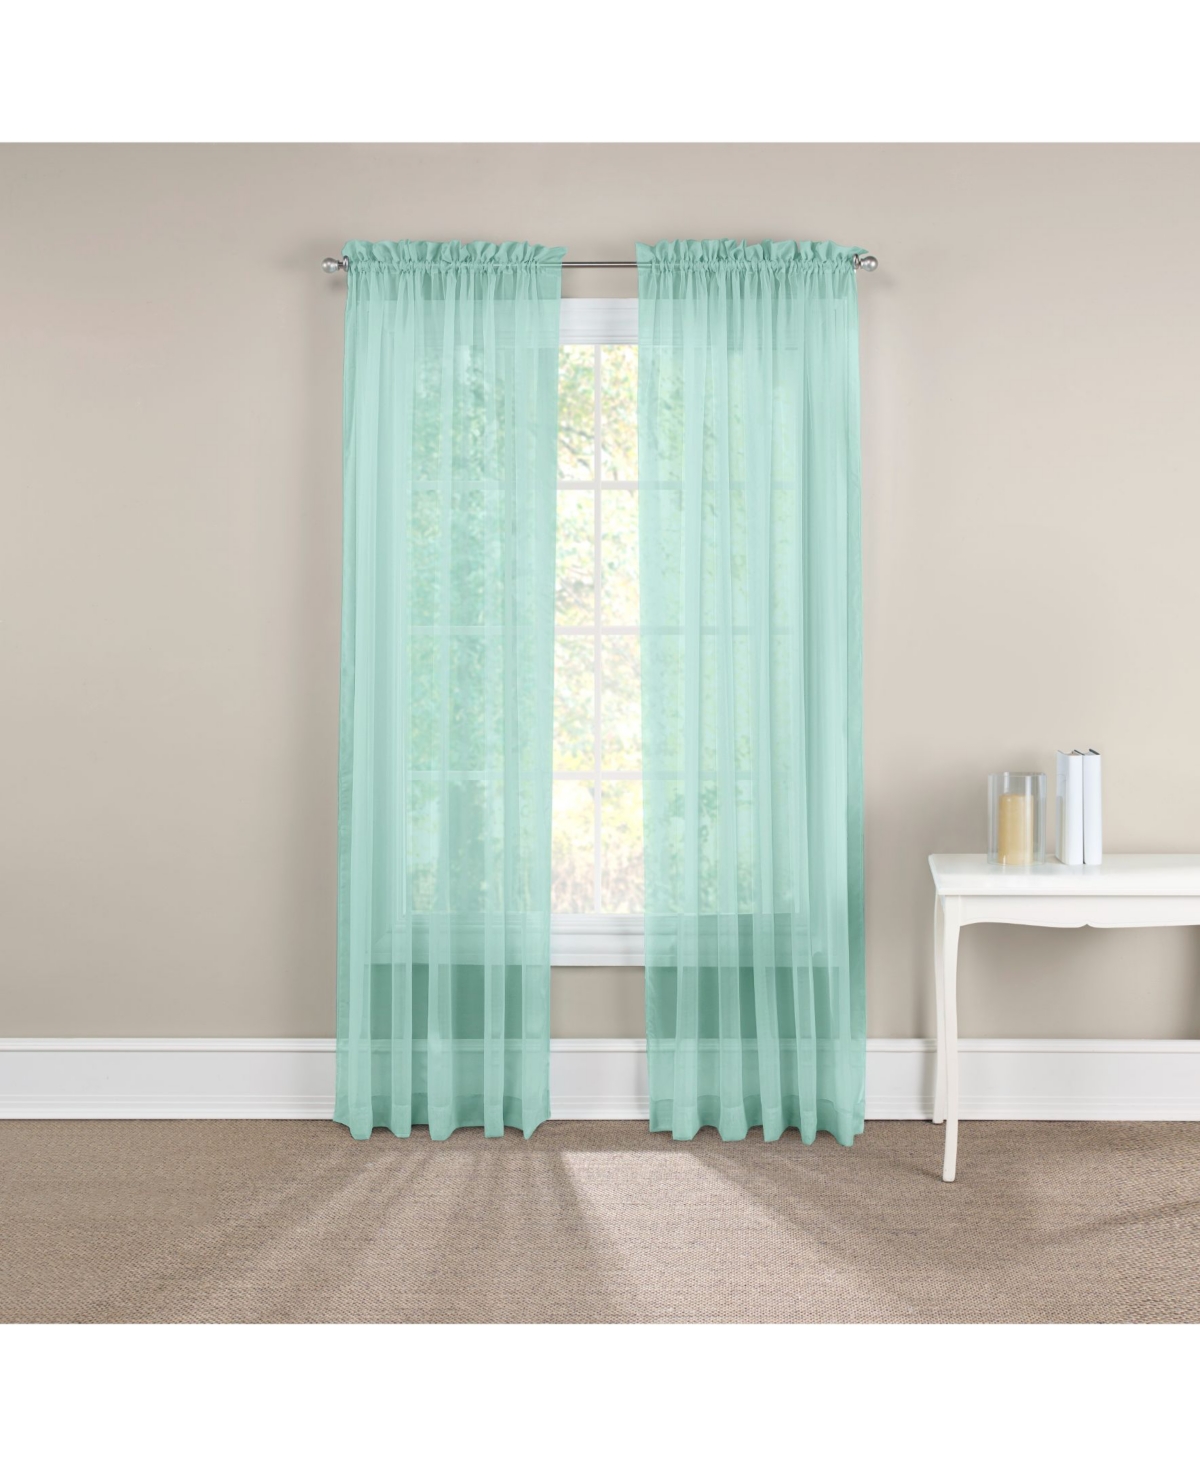 Eclipse Pairs To Go Victoria Voile 63" X 118" Curtain Panel, Set Of 2 In Turquoise